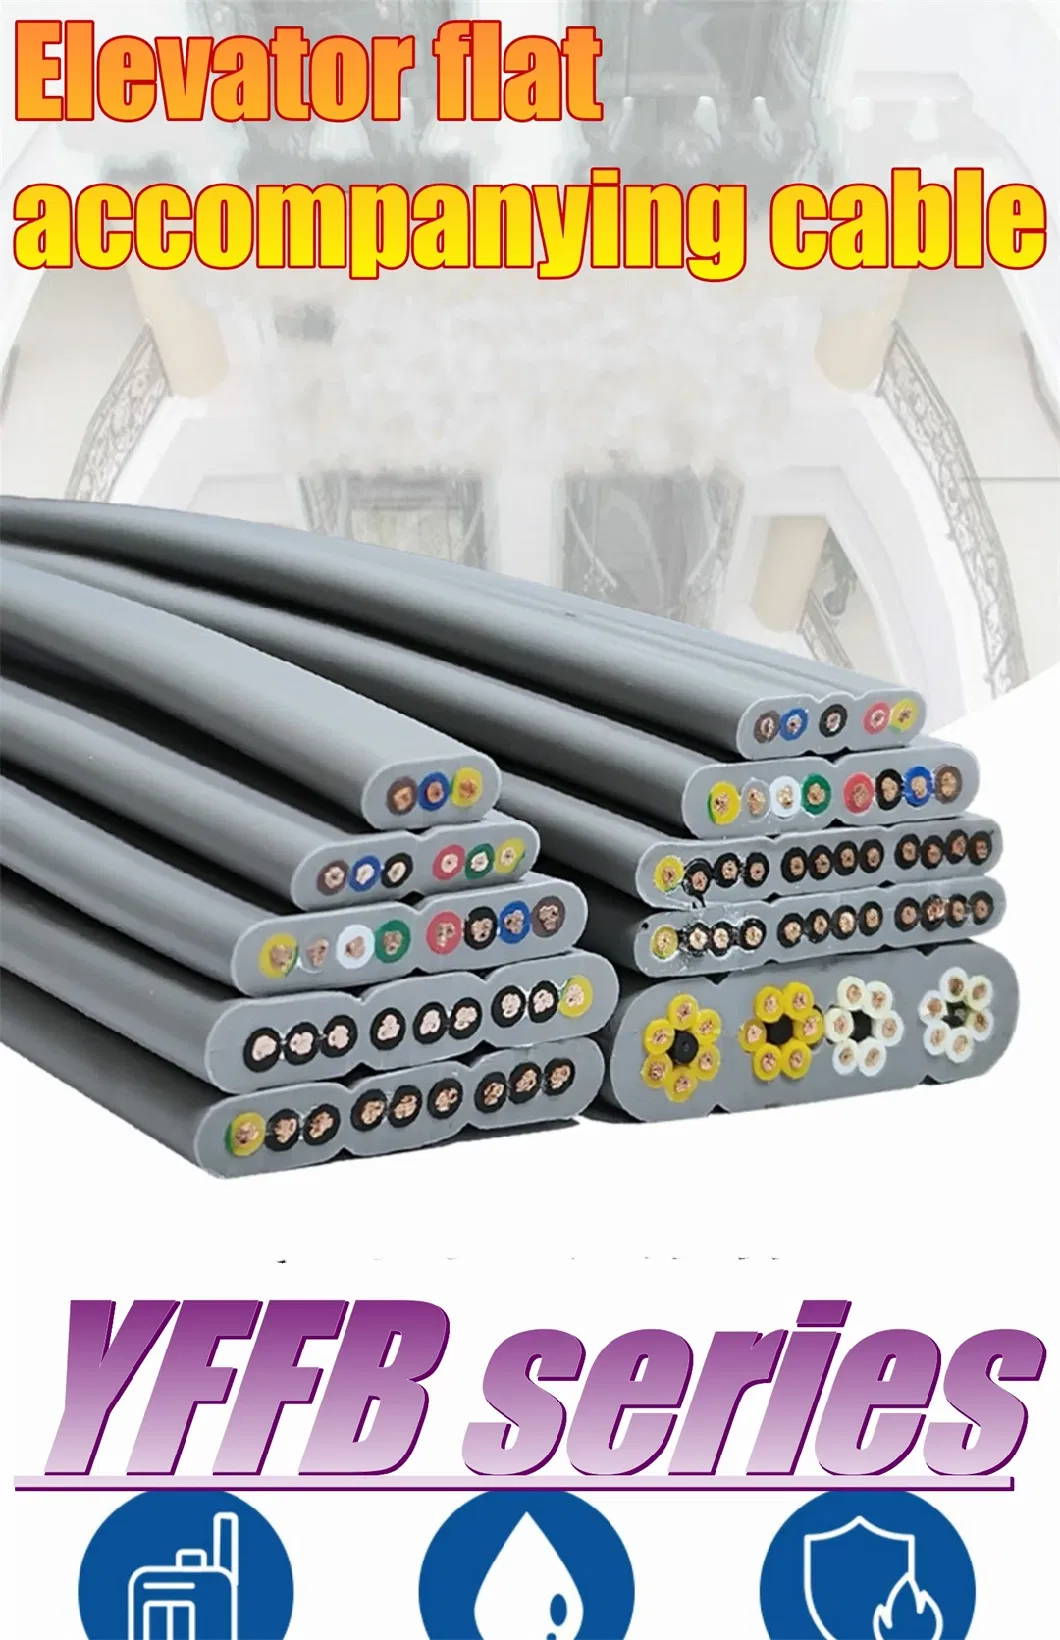 Yffb 300/500V 0.5-25mm2 2-60 Cores Elevator Drag Chain Accompanying Flexible Cable